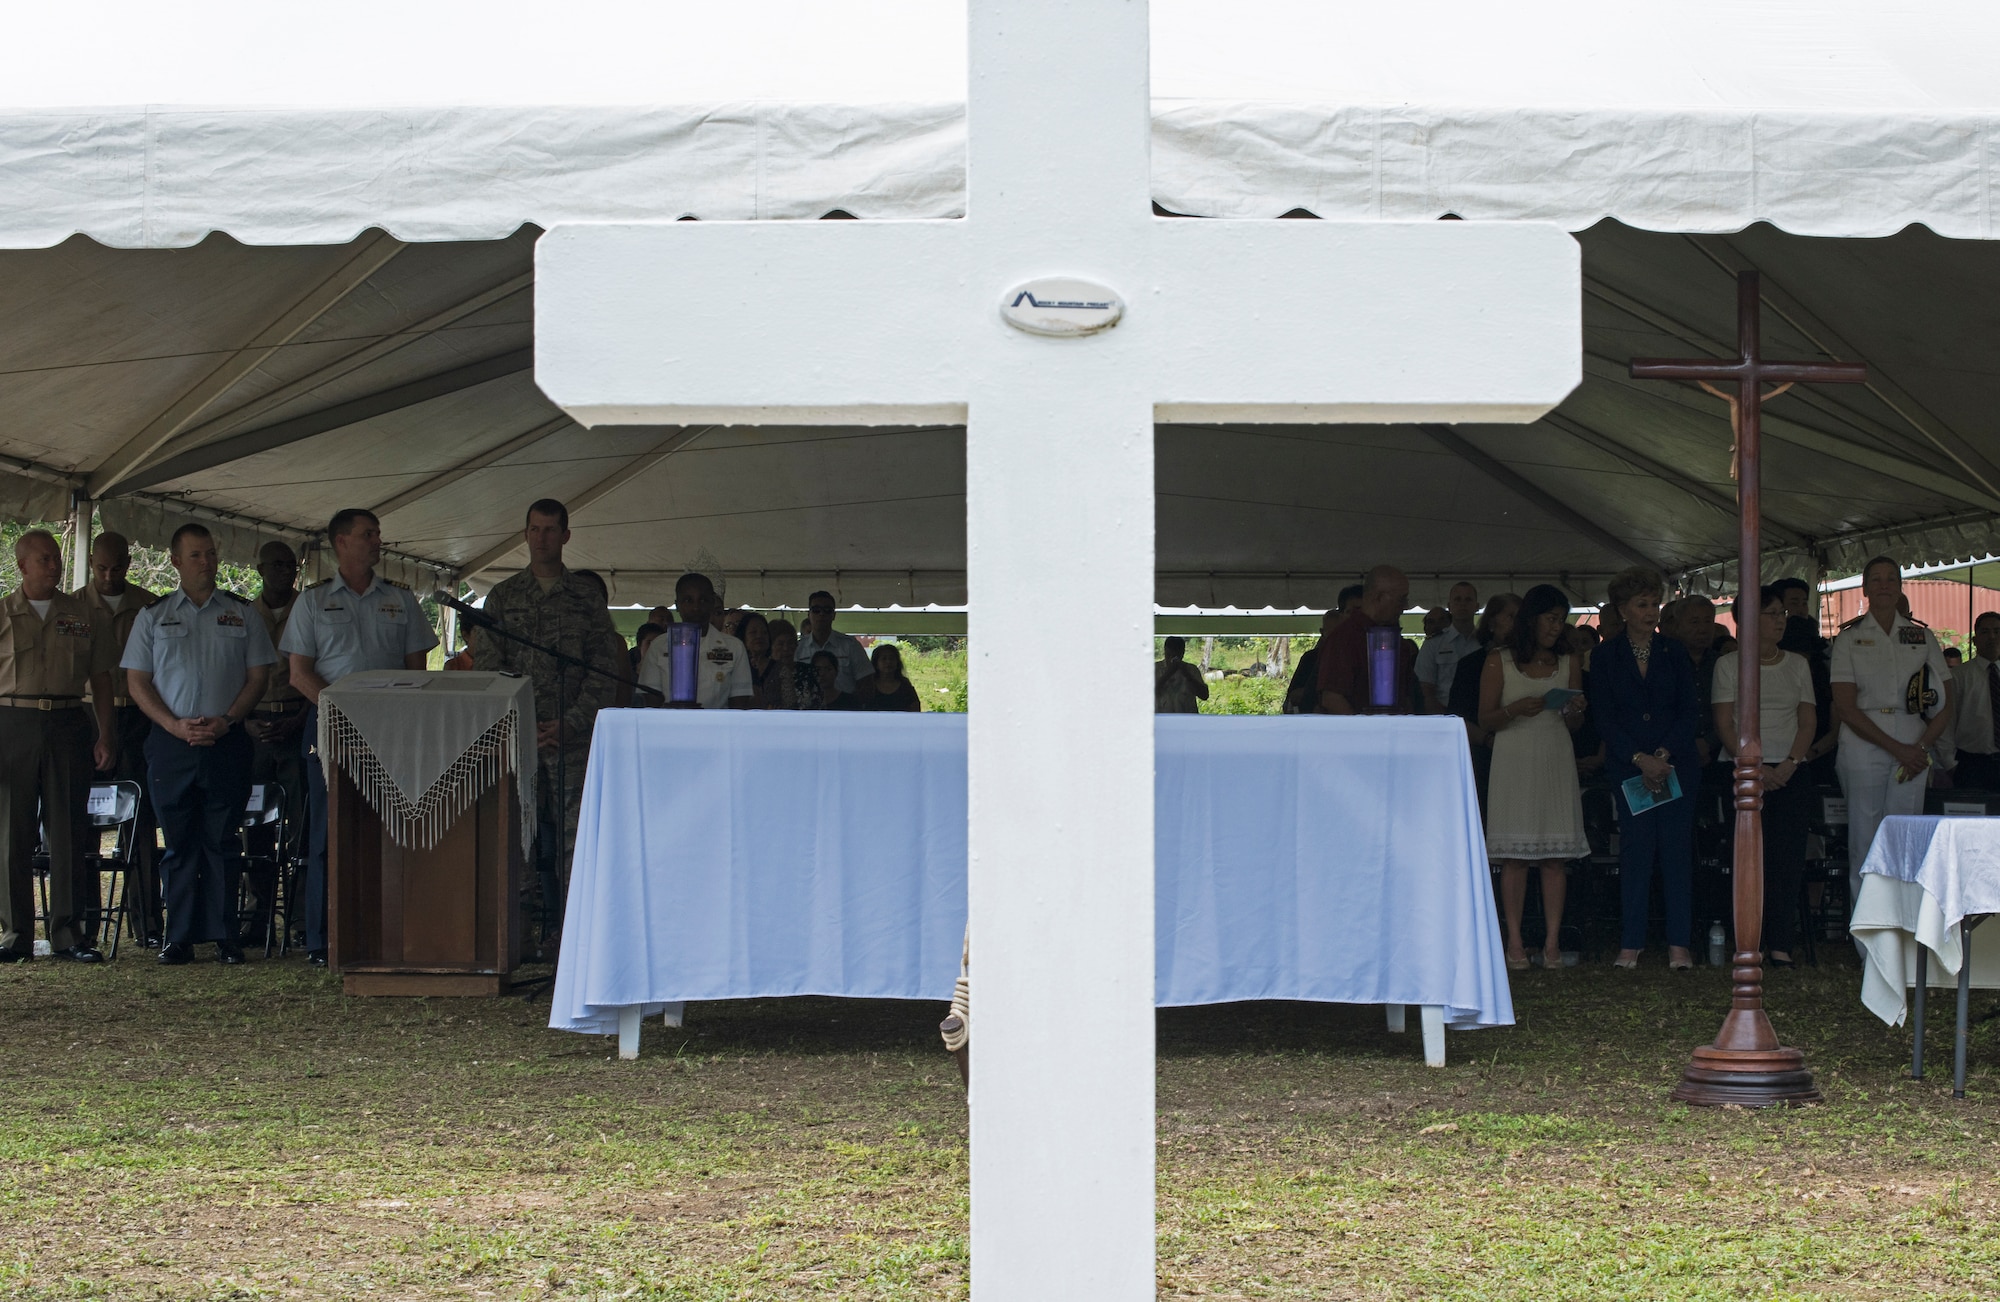 The Chaguian Massacre Memorial is held Aug. 8, 2018, in Yigo, Guam. The ceremony honored the lives of Chamorro men who were slain at the site in the wake of World War II. U.S. service members, Japanese dignitaries, local Chamorros, and descendants of the victims all attended to pay their respects. (U.S. Air Force photo by Tech. Sgt. Jake M. Barreiro)